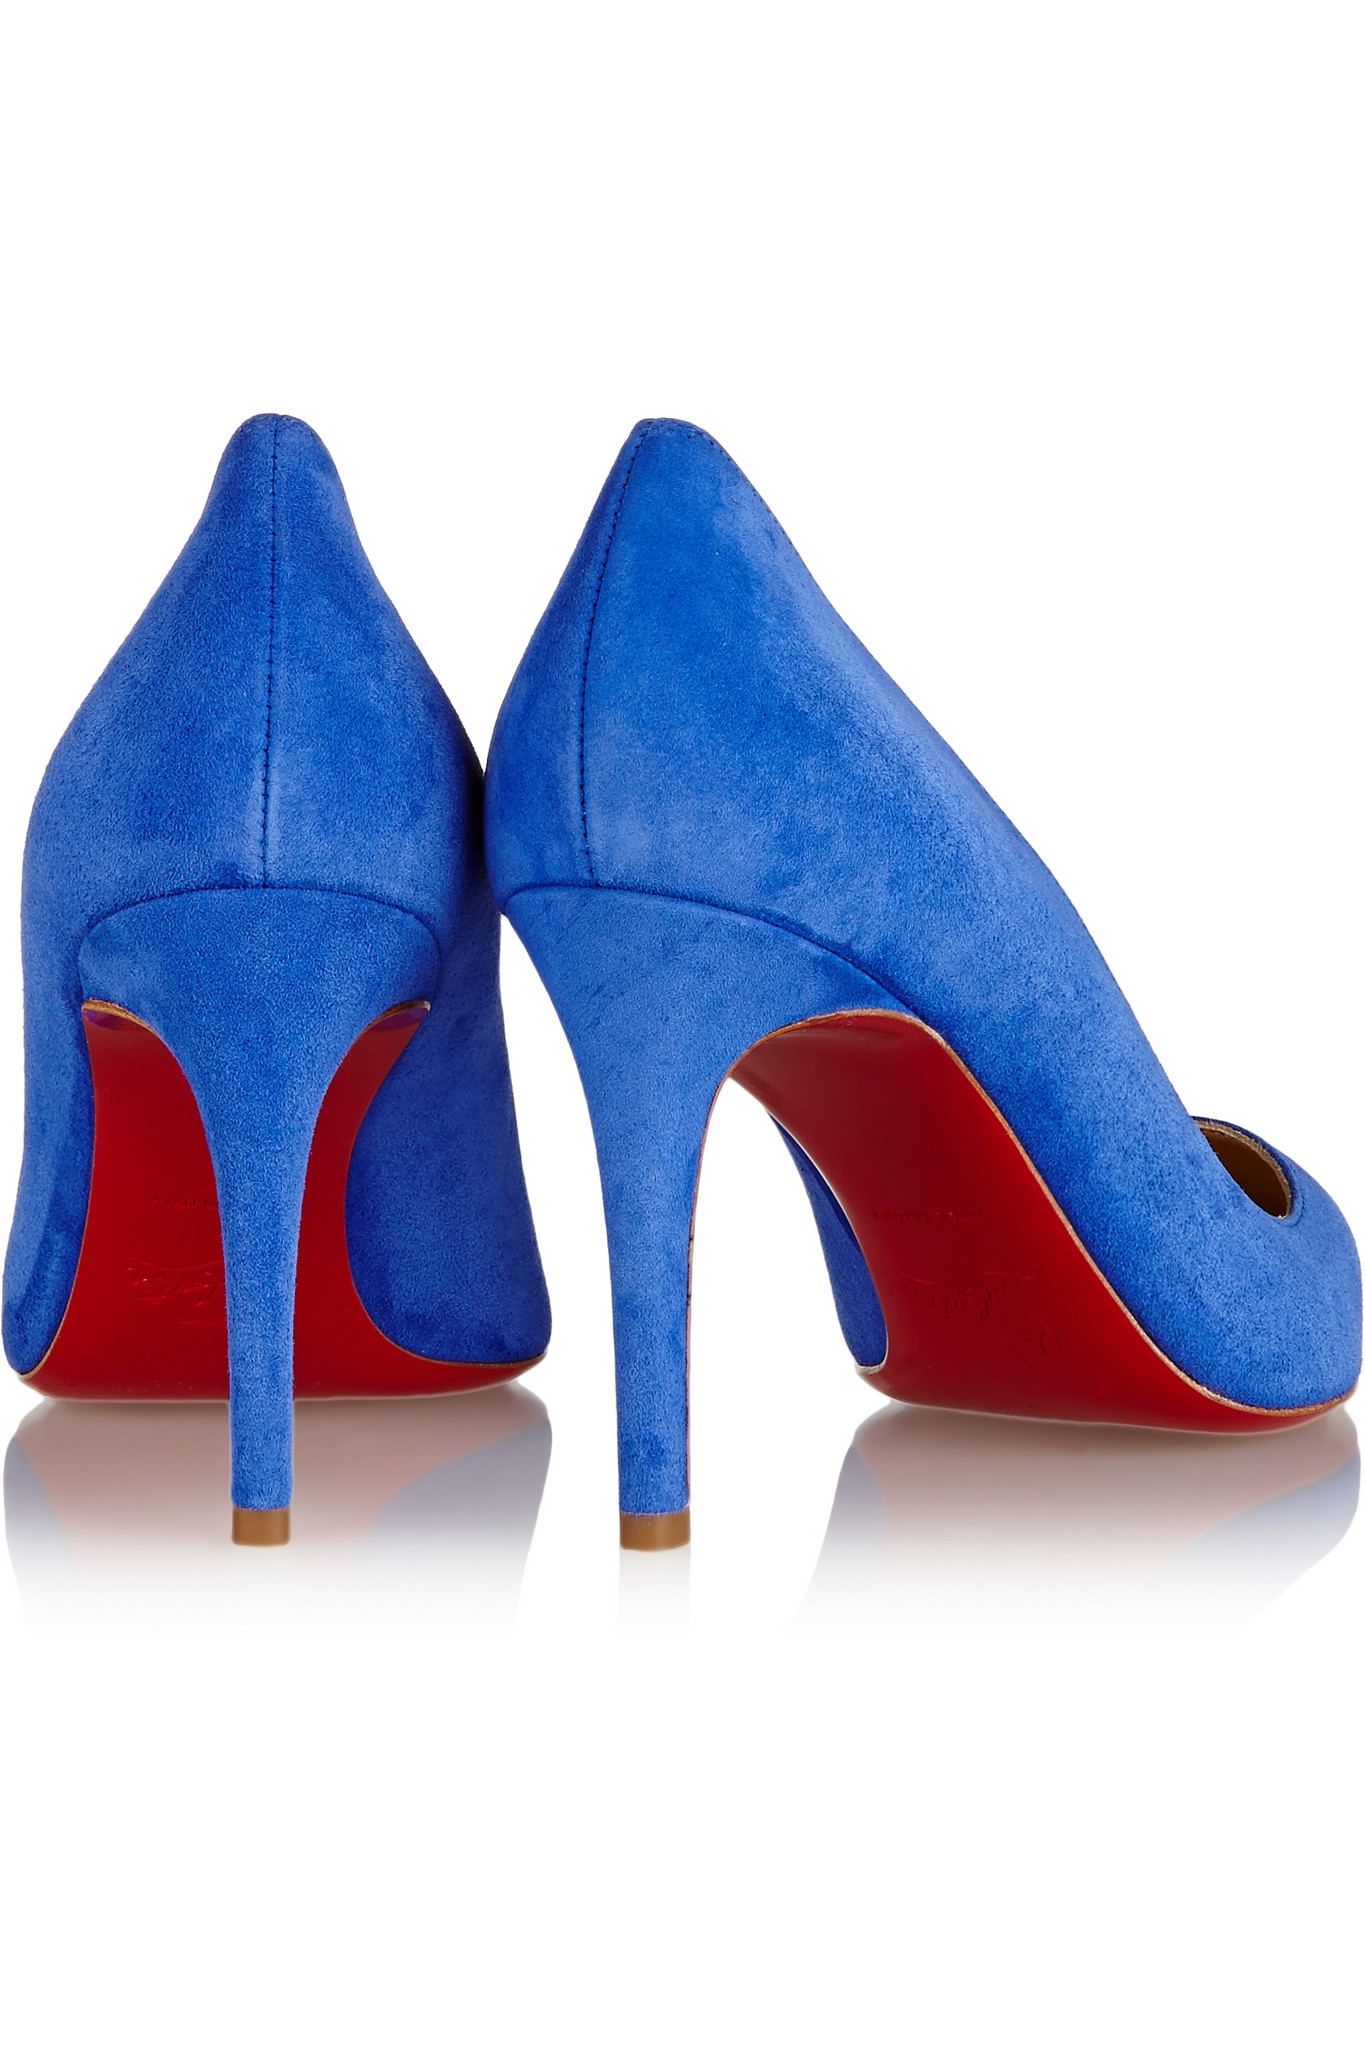 Christian Louboutin Pigalle 85 Suede Pumps in Bright Blue (Blue) - Lyst